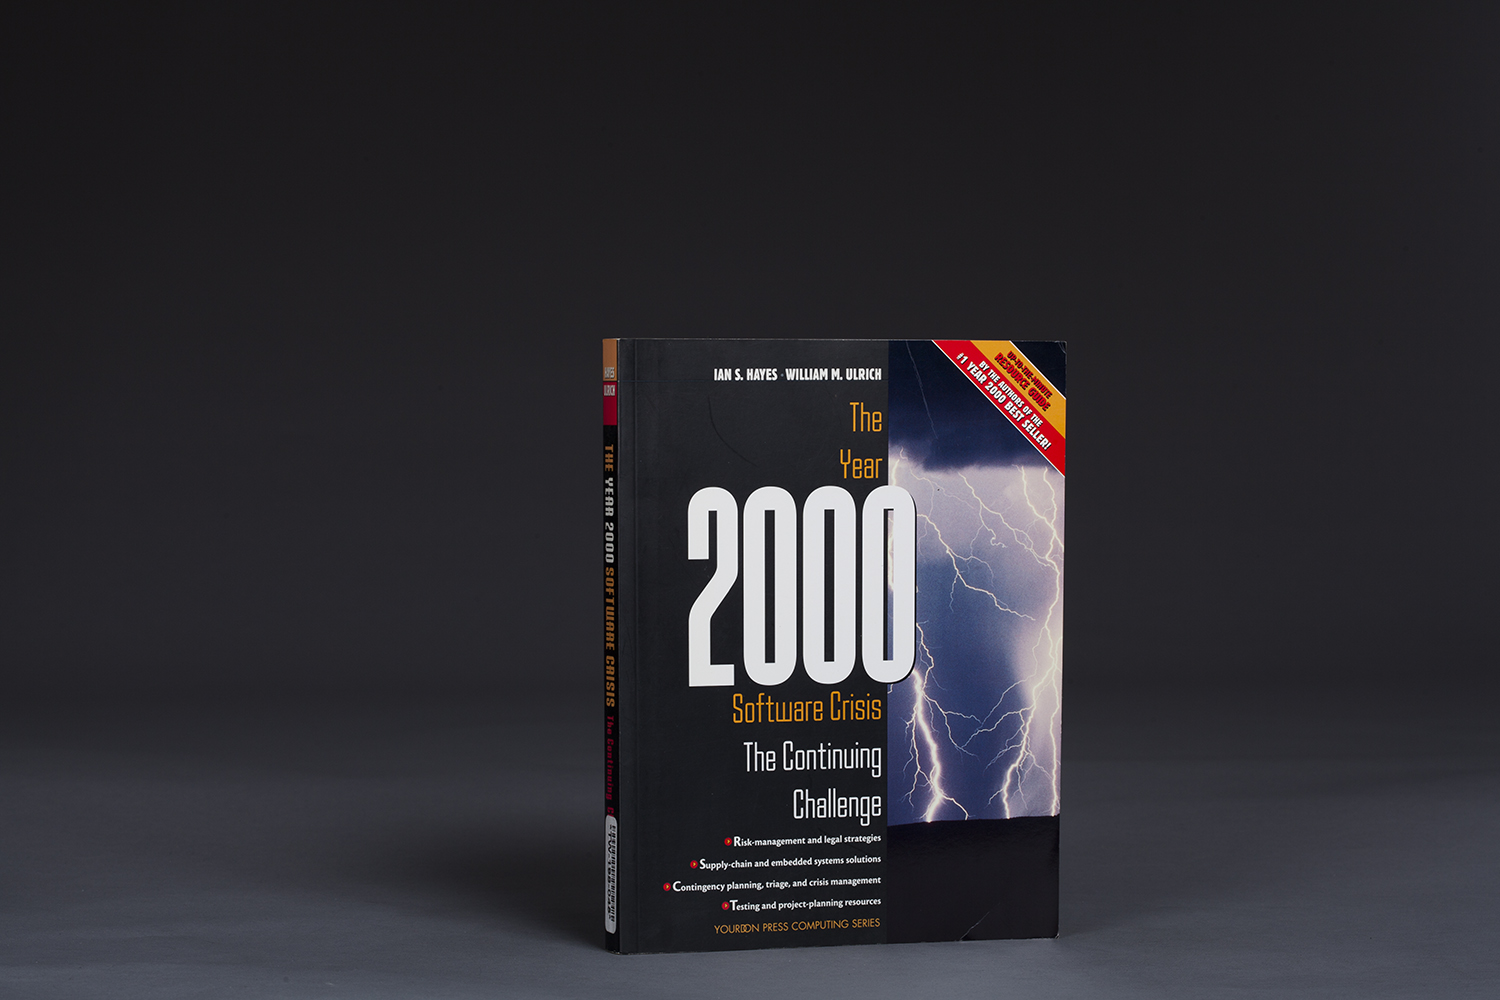 The Year 2000 Software Crisis - The Continuing Challenge - 0650 Cover.jpg